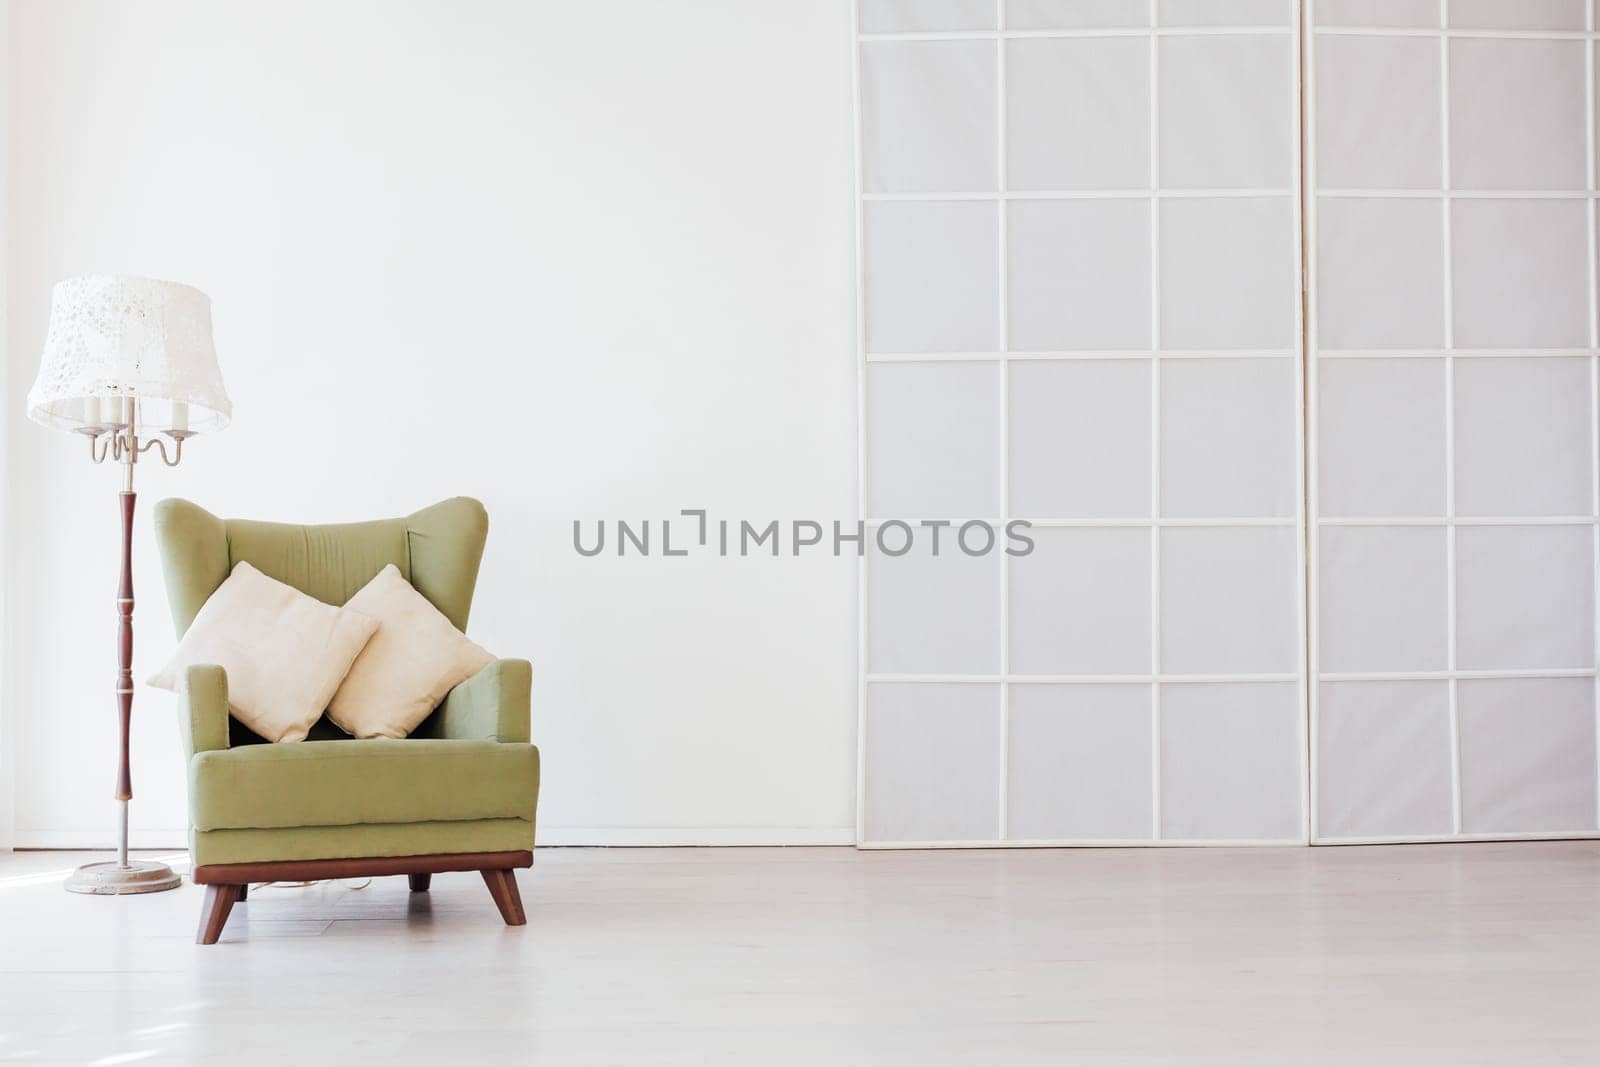 green vintage chair in the interior of an empty white room by Simakov